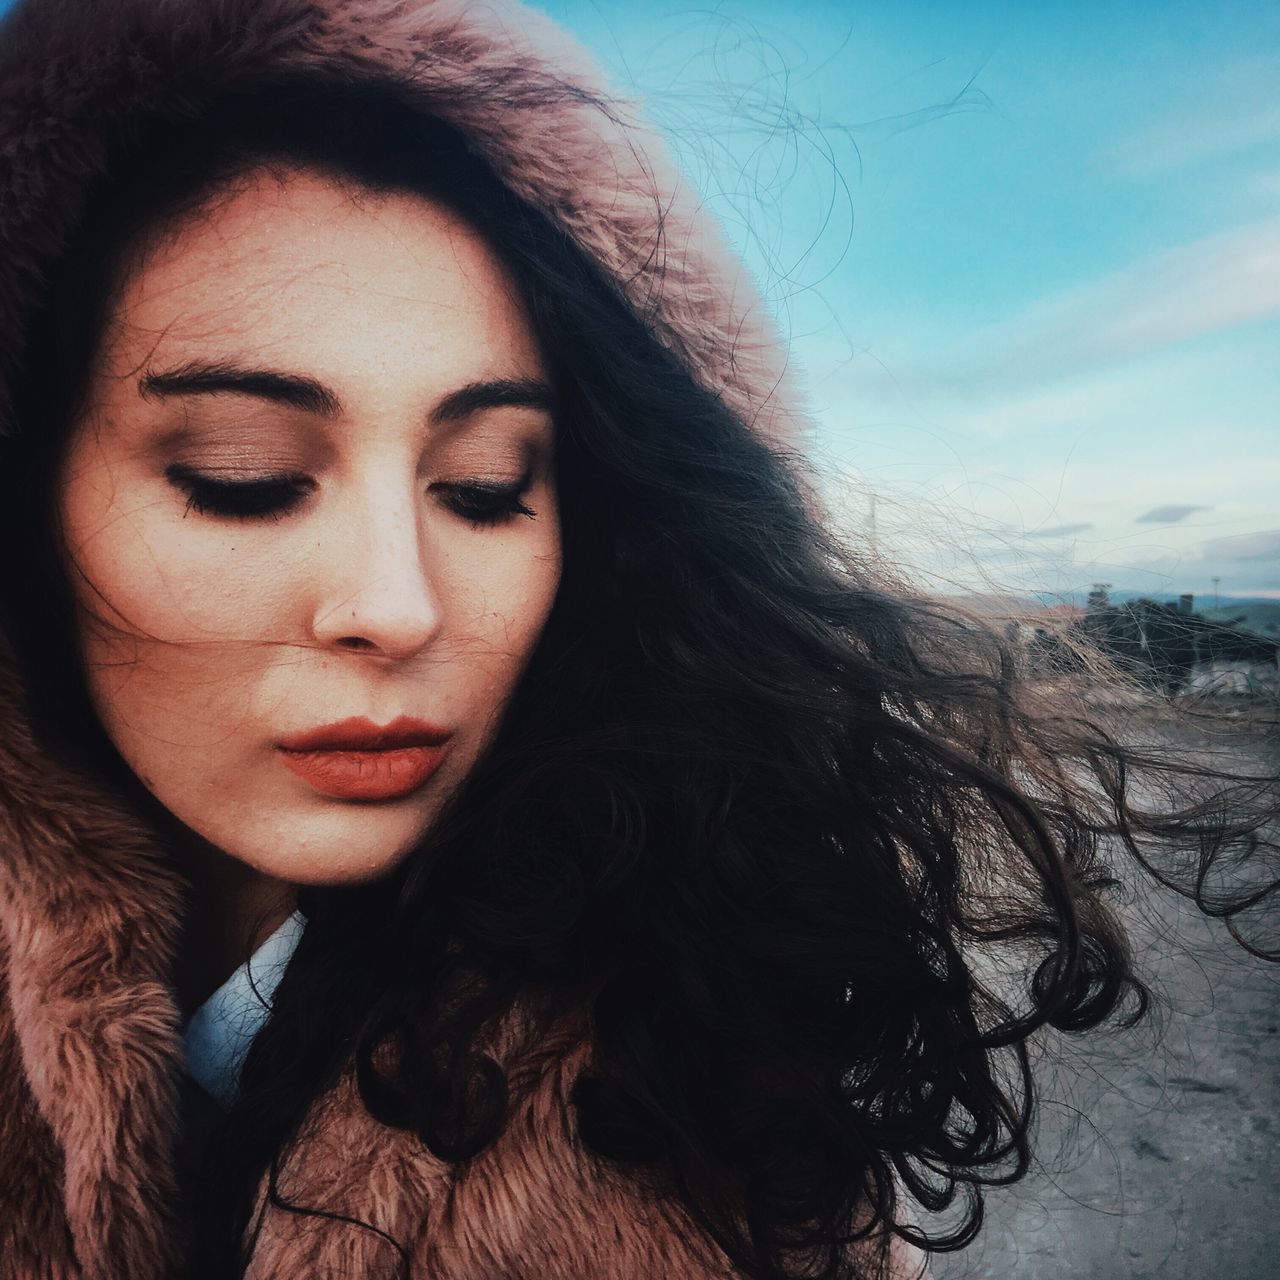 one person, young women, young adult, hair, headshot, long hair, lifestyles, leisure activity, portrait, front view, real people, hairstyle, eyes closed, beautiful woman, beauty, close-up, women, adult, outdoors, human face, warm clothing, contemplation, human hair